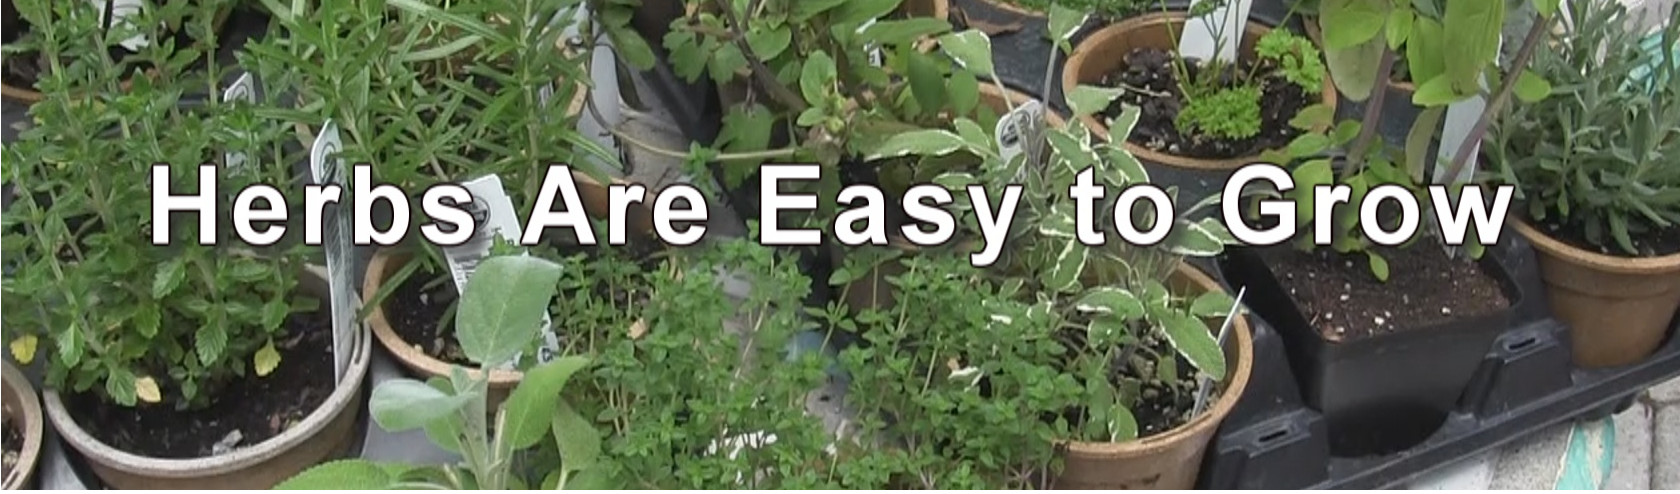 Herbs easy to grow